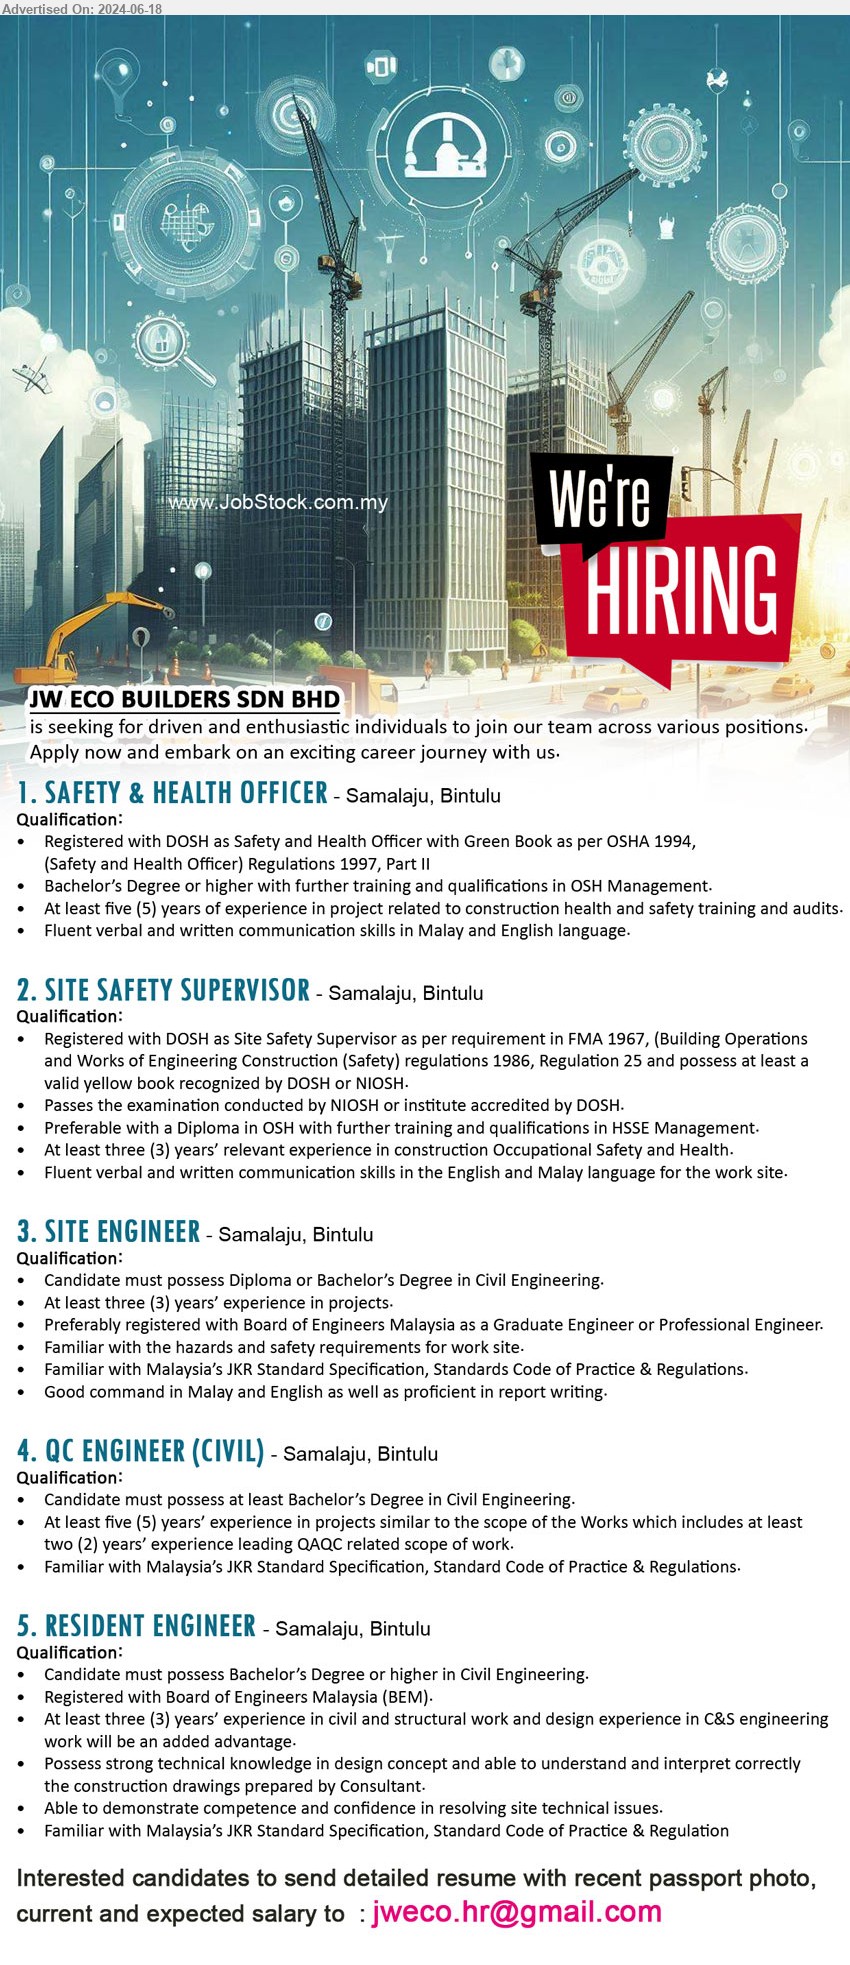 JW ECO BUILDERS SDN BHD - 1. SAFETY & HEALTH OFFICER (Samalaju, Bintulu), Registered with DOSH as Safety and Health Officer with Green Book as per OSHA 1994, ,...
2. SITE SAFETY SUPERVISOR (Samalaju, Bintulu), Registered with DOSH as Site Safety Supervisor as per requirement in FMA 1967, ,...
3. SITE ENGINEER  (Samalaju, Bintulu), Diploma or Bachelor’s Degree in Civil Engineering.,...
4. QC ENGINEER (CIVIL) (Samalaju, Bintulu), Candidate must possess at least Bachelor’s Degree in Civil Engineering.,...
5. RESIDENT ENGINEER (Samalaju, Bintulu), Candidate must possess at least Bachelor’s Degree in Civil Engineering.,...
Email resume to ...